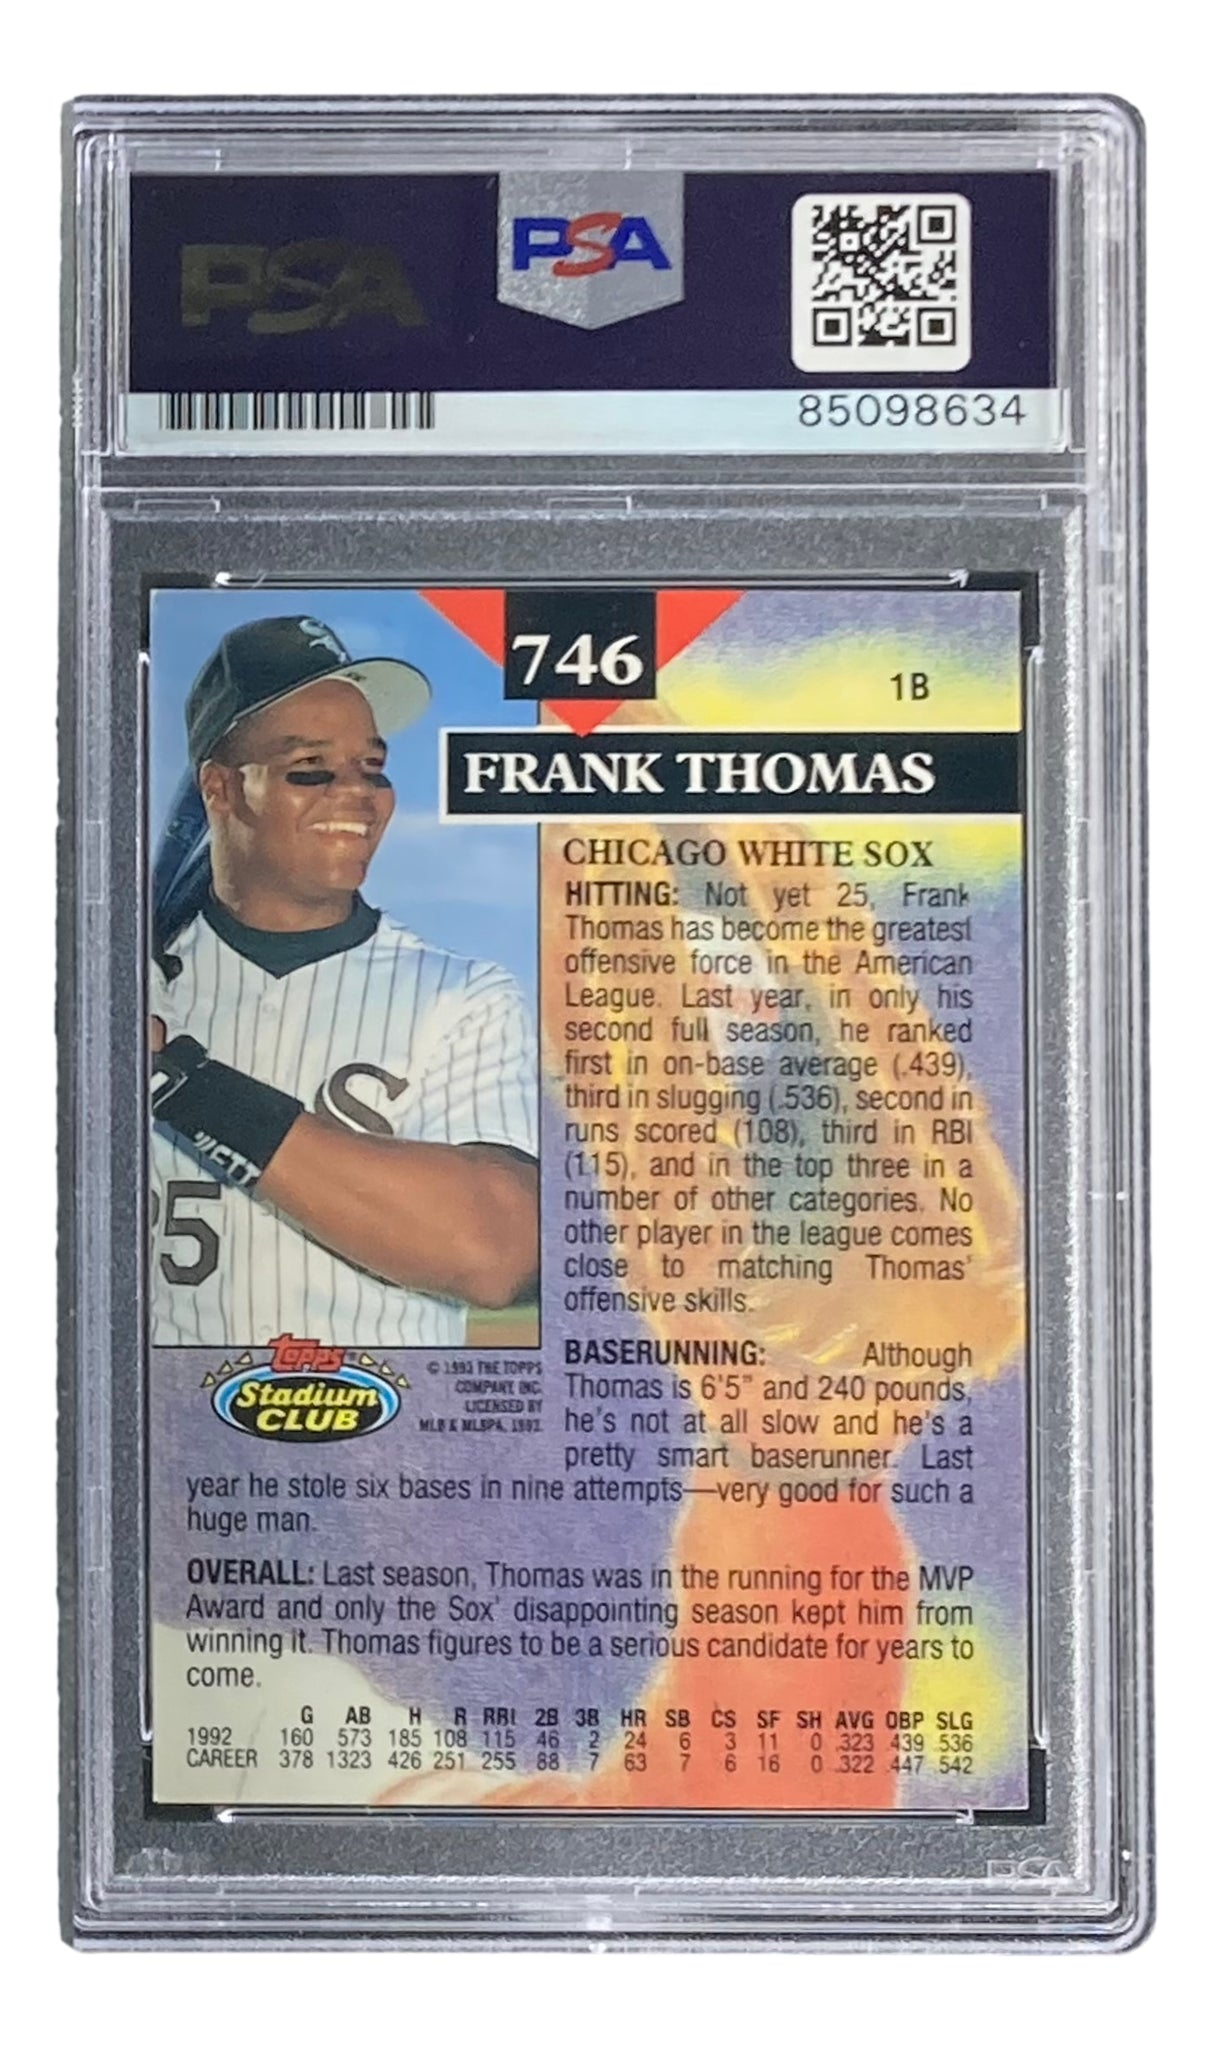 Frank Thomas Signed 1993 Topps #746 Chicago White Sox Trading Card